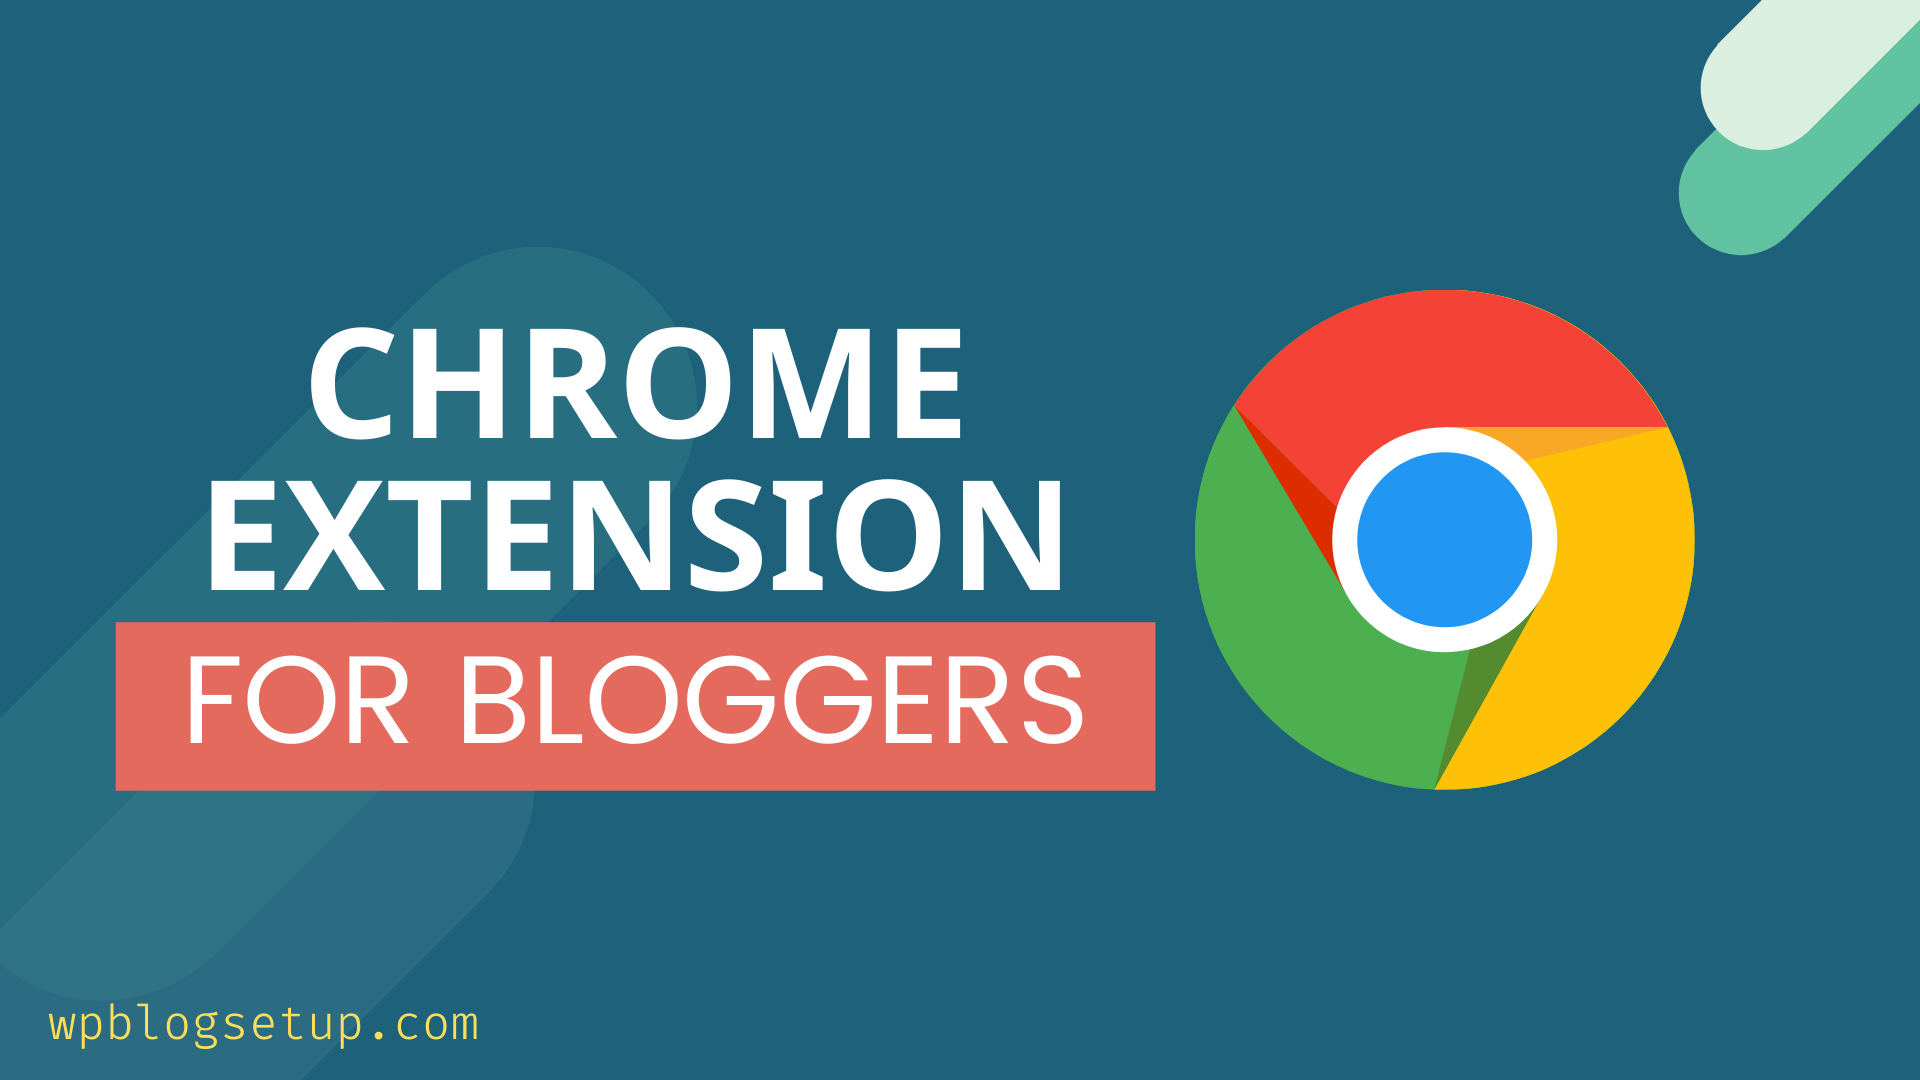 Chrome extension for Bloggers